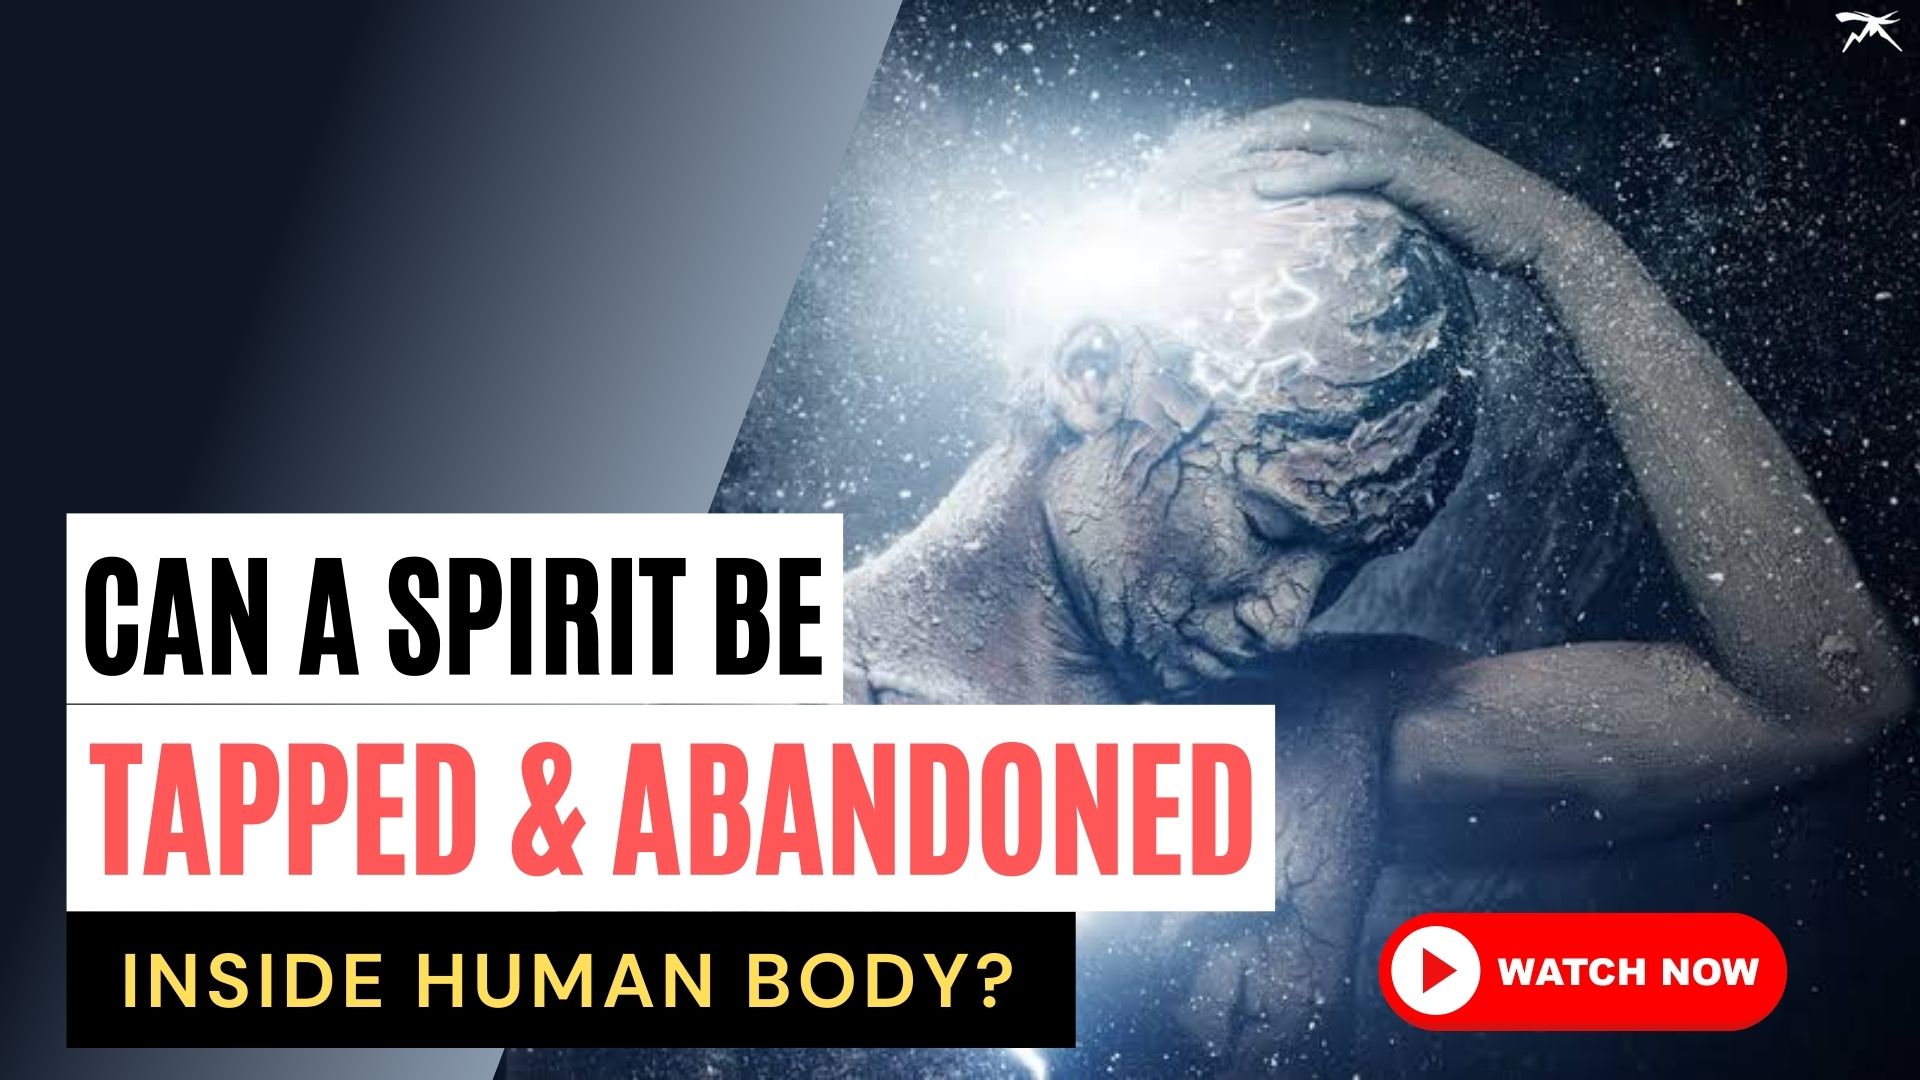 Can A Spirit Be TRAPPED & ABANDONED Inside Human Body?